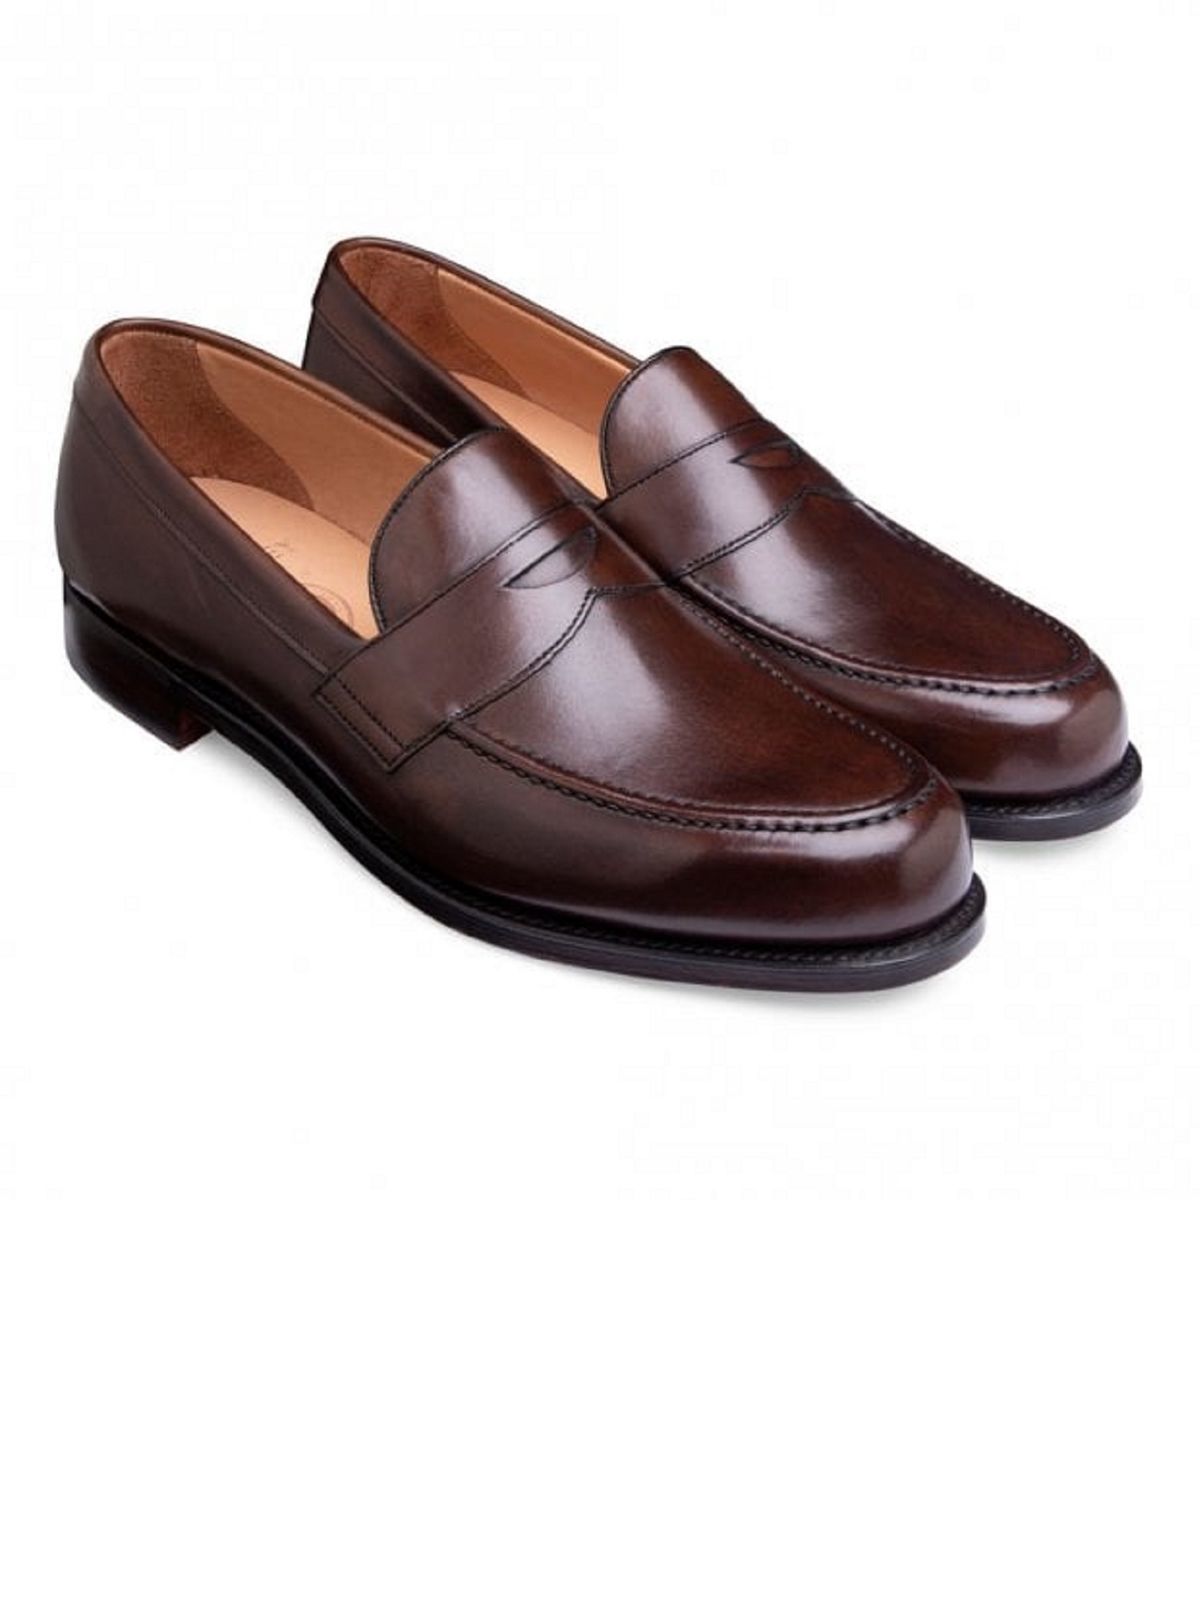 Joseph Cheaney & Sons Loafers - Maus & Hoffman